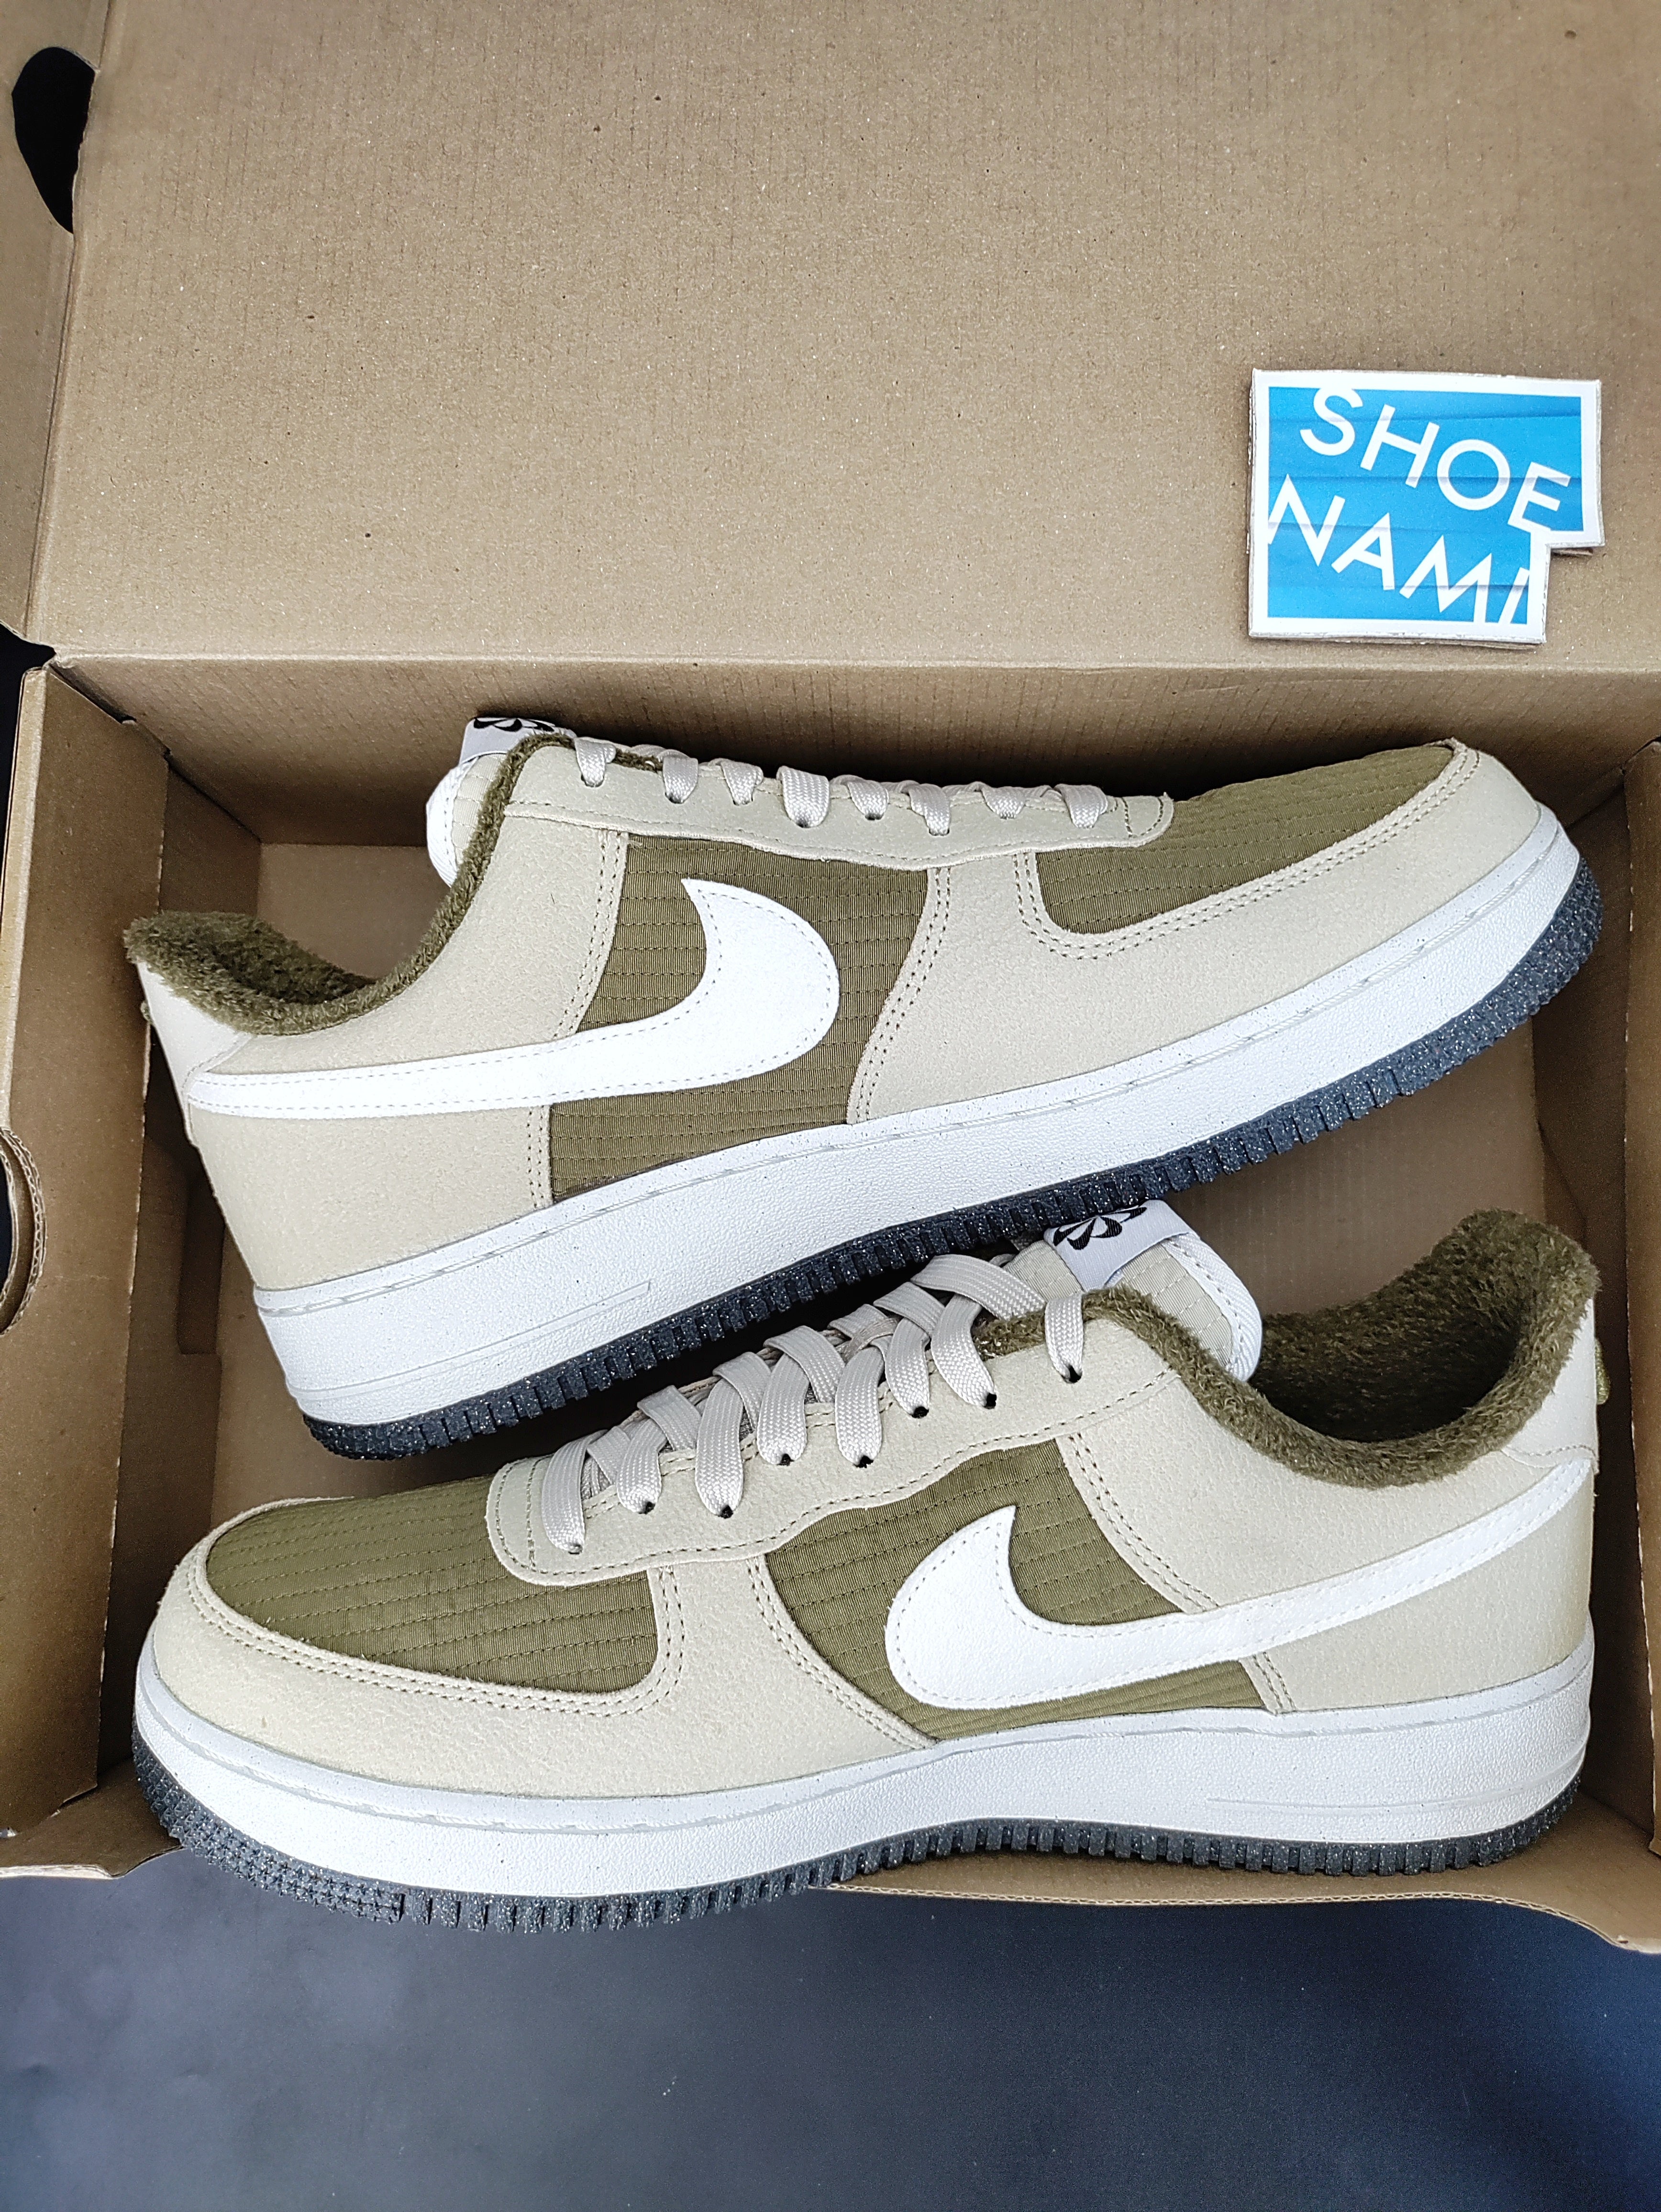 Nike Men's Air Force 1 '07 LV8 Next Nature Shoes